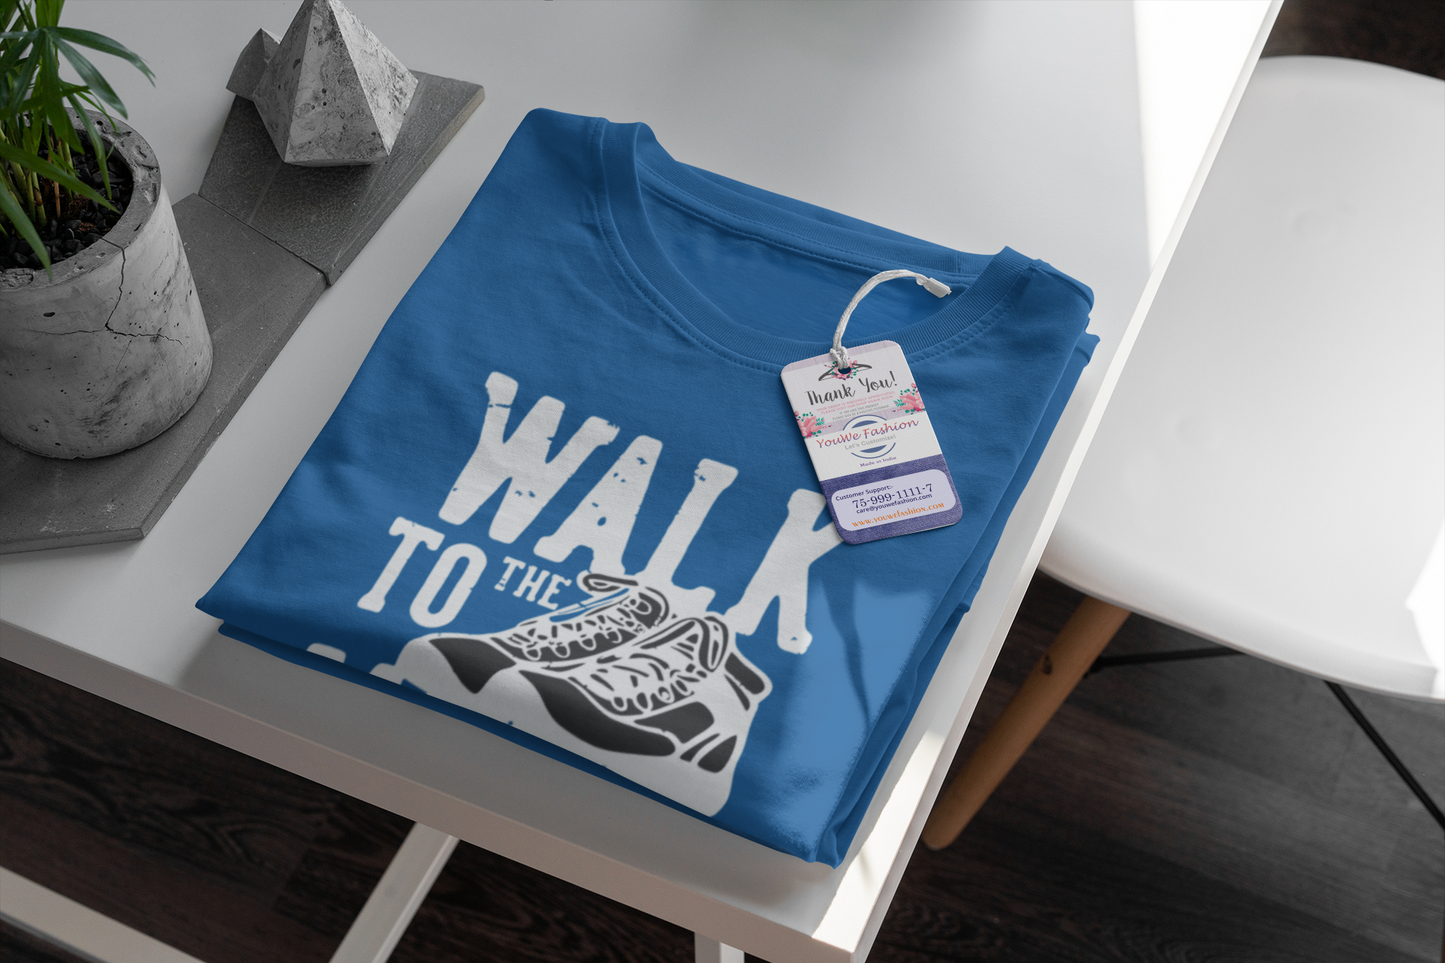 YouWe Fashion "Walk to Wild" Royal Blue Cotton T-Shirt for Youth (S-XL) (Copy)